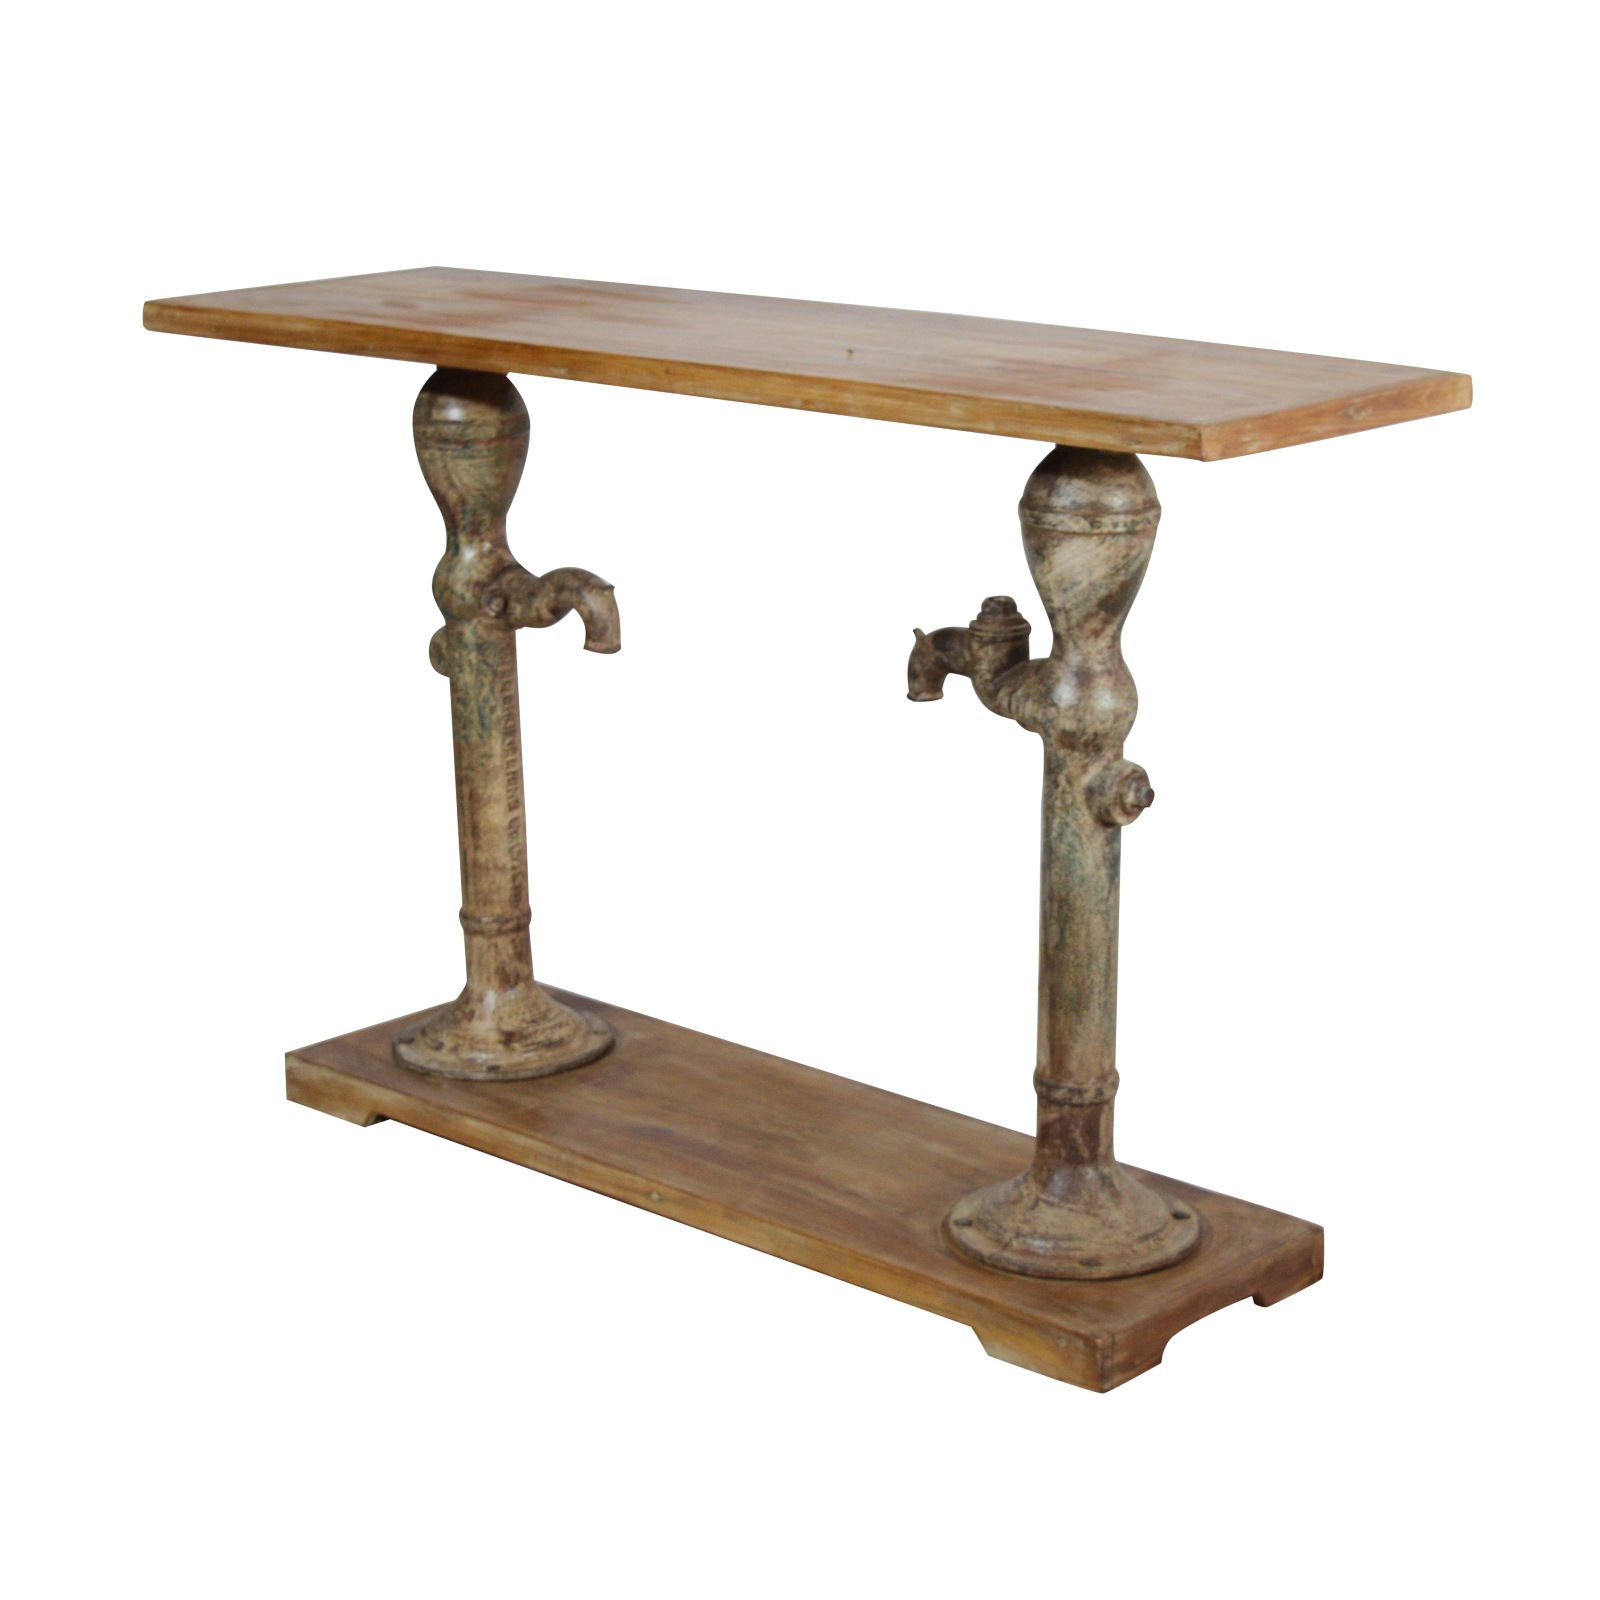 HAND PUMP CONSOLE TABLE RECLAIMED WOOD TOP